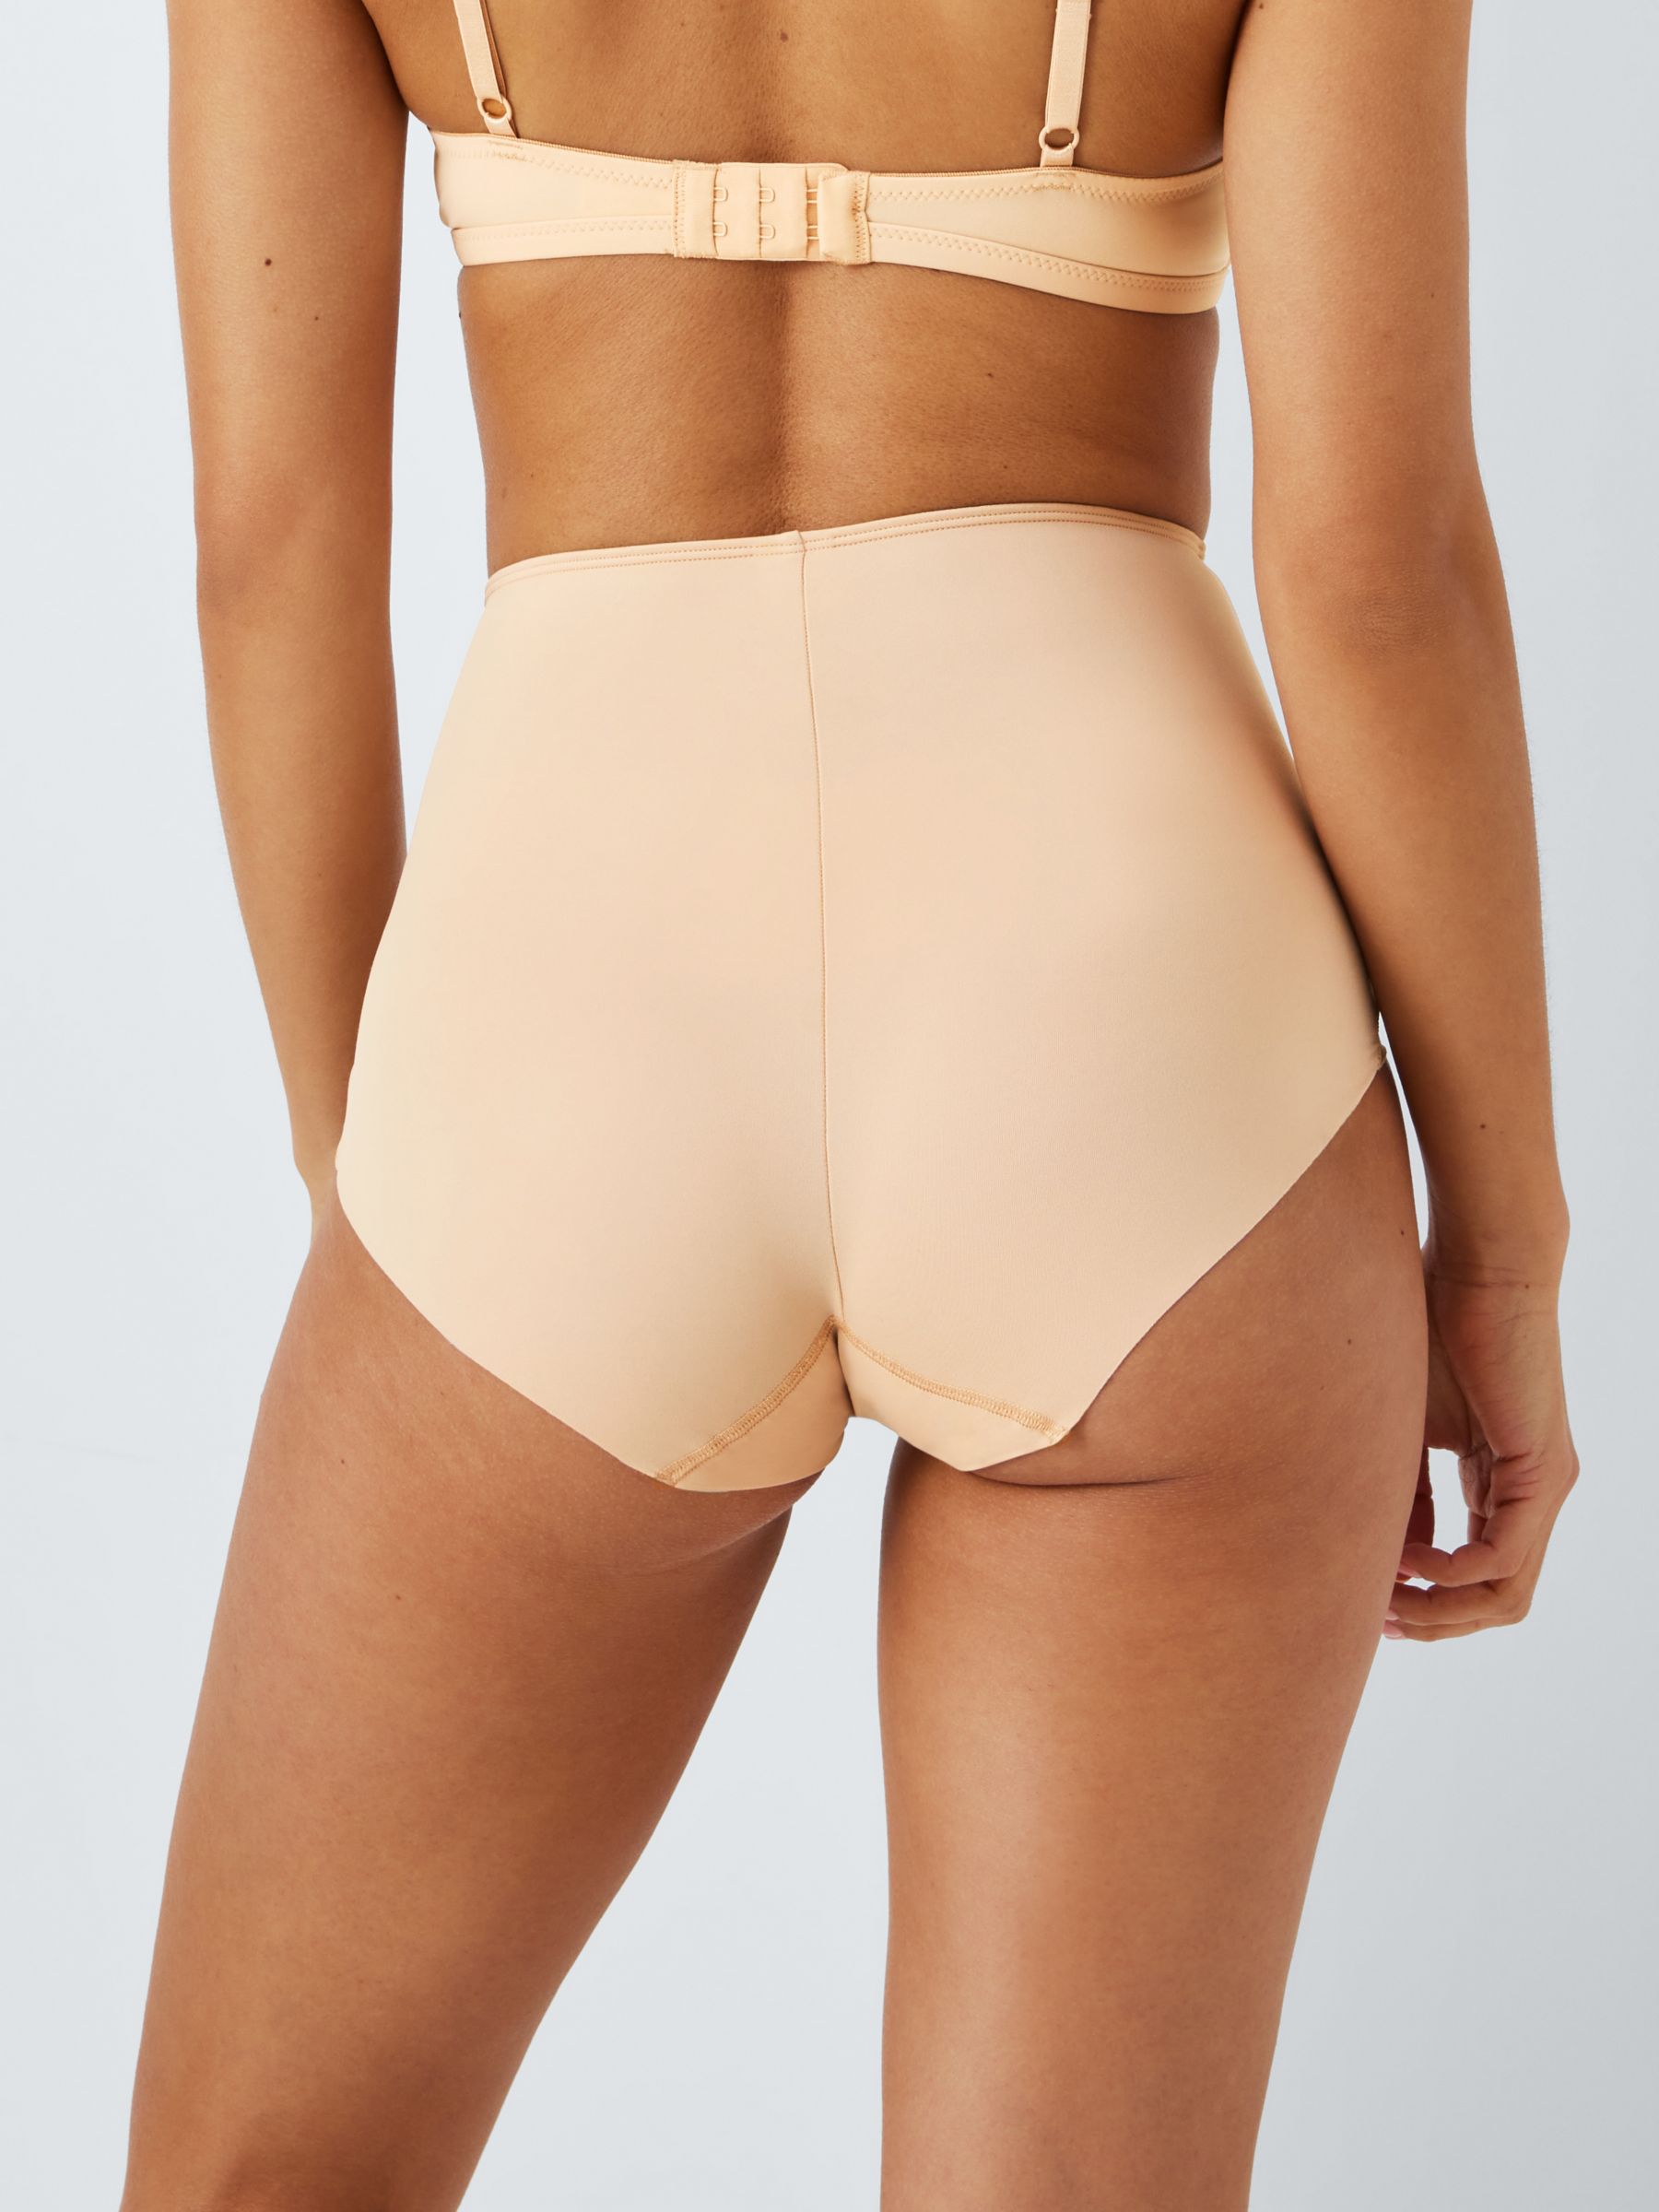 John Lewis ANYDAY Full Shaping Knickers, Pack of 2, Almond, 10